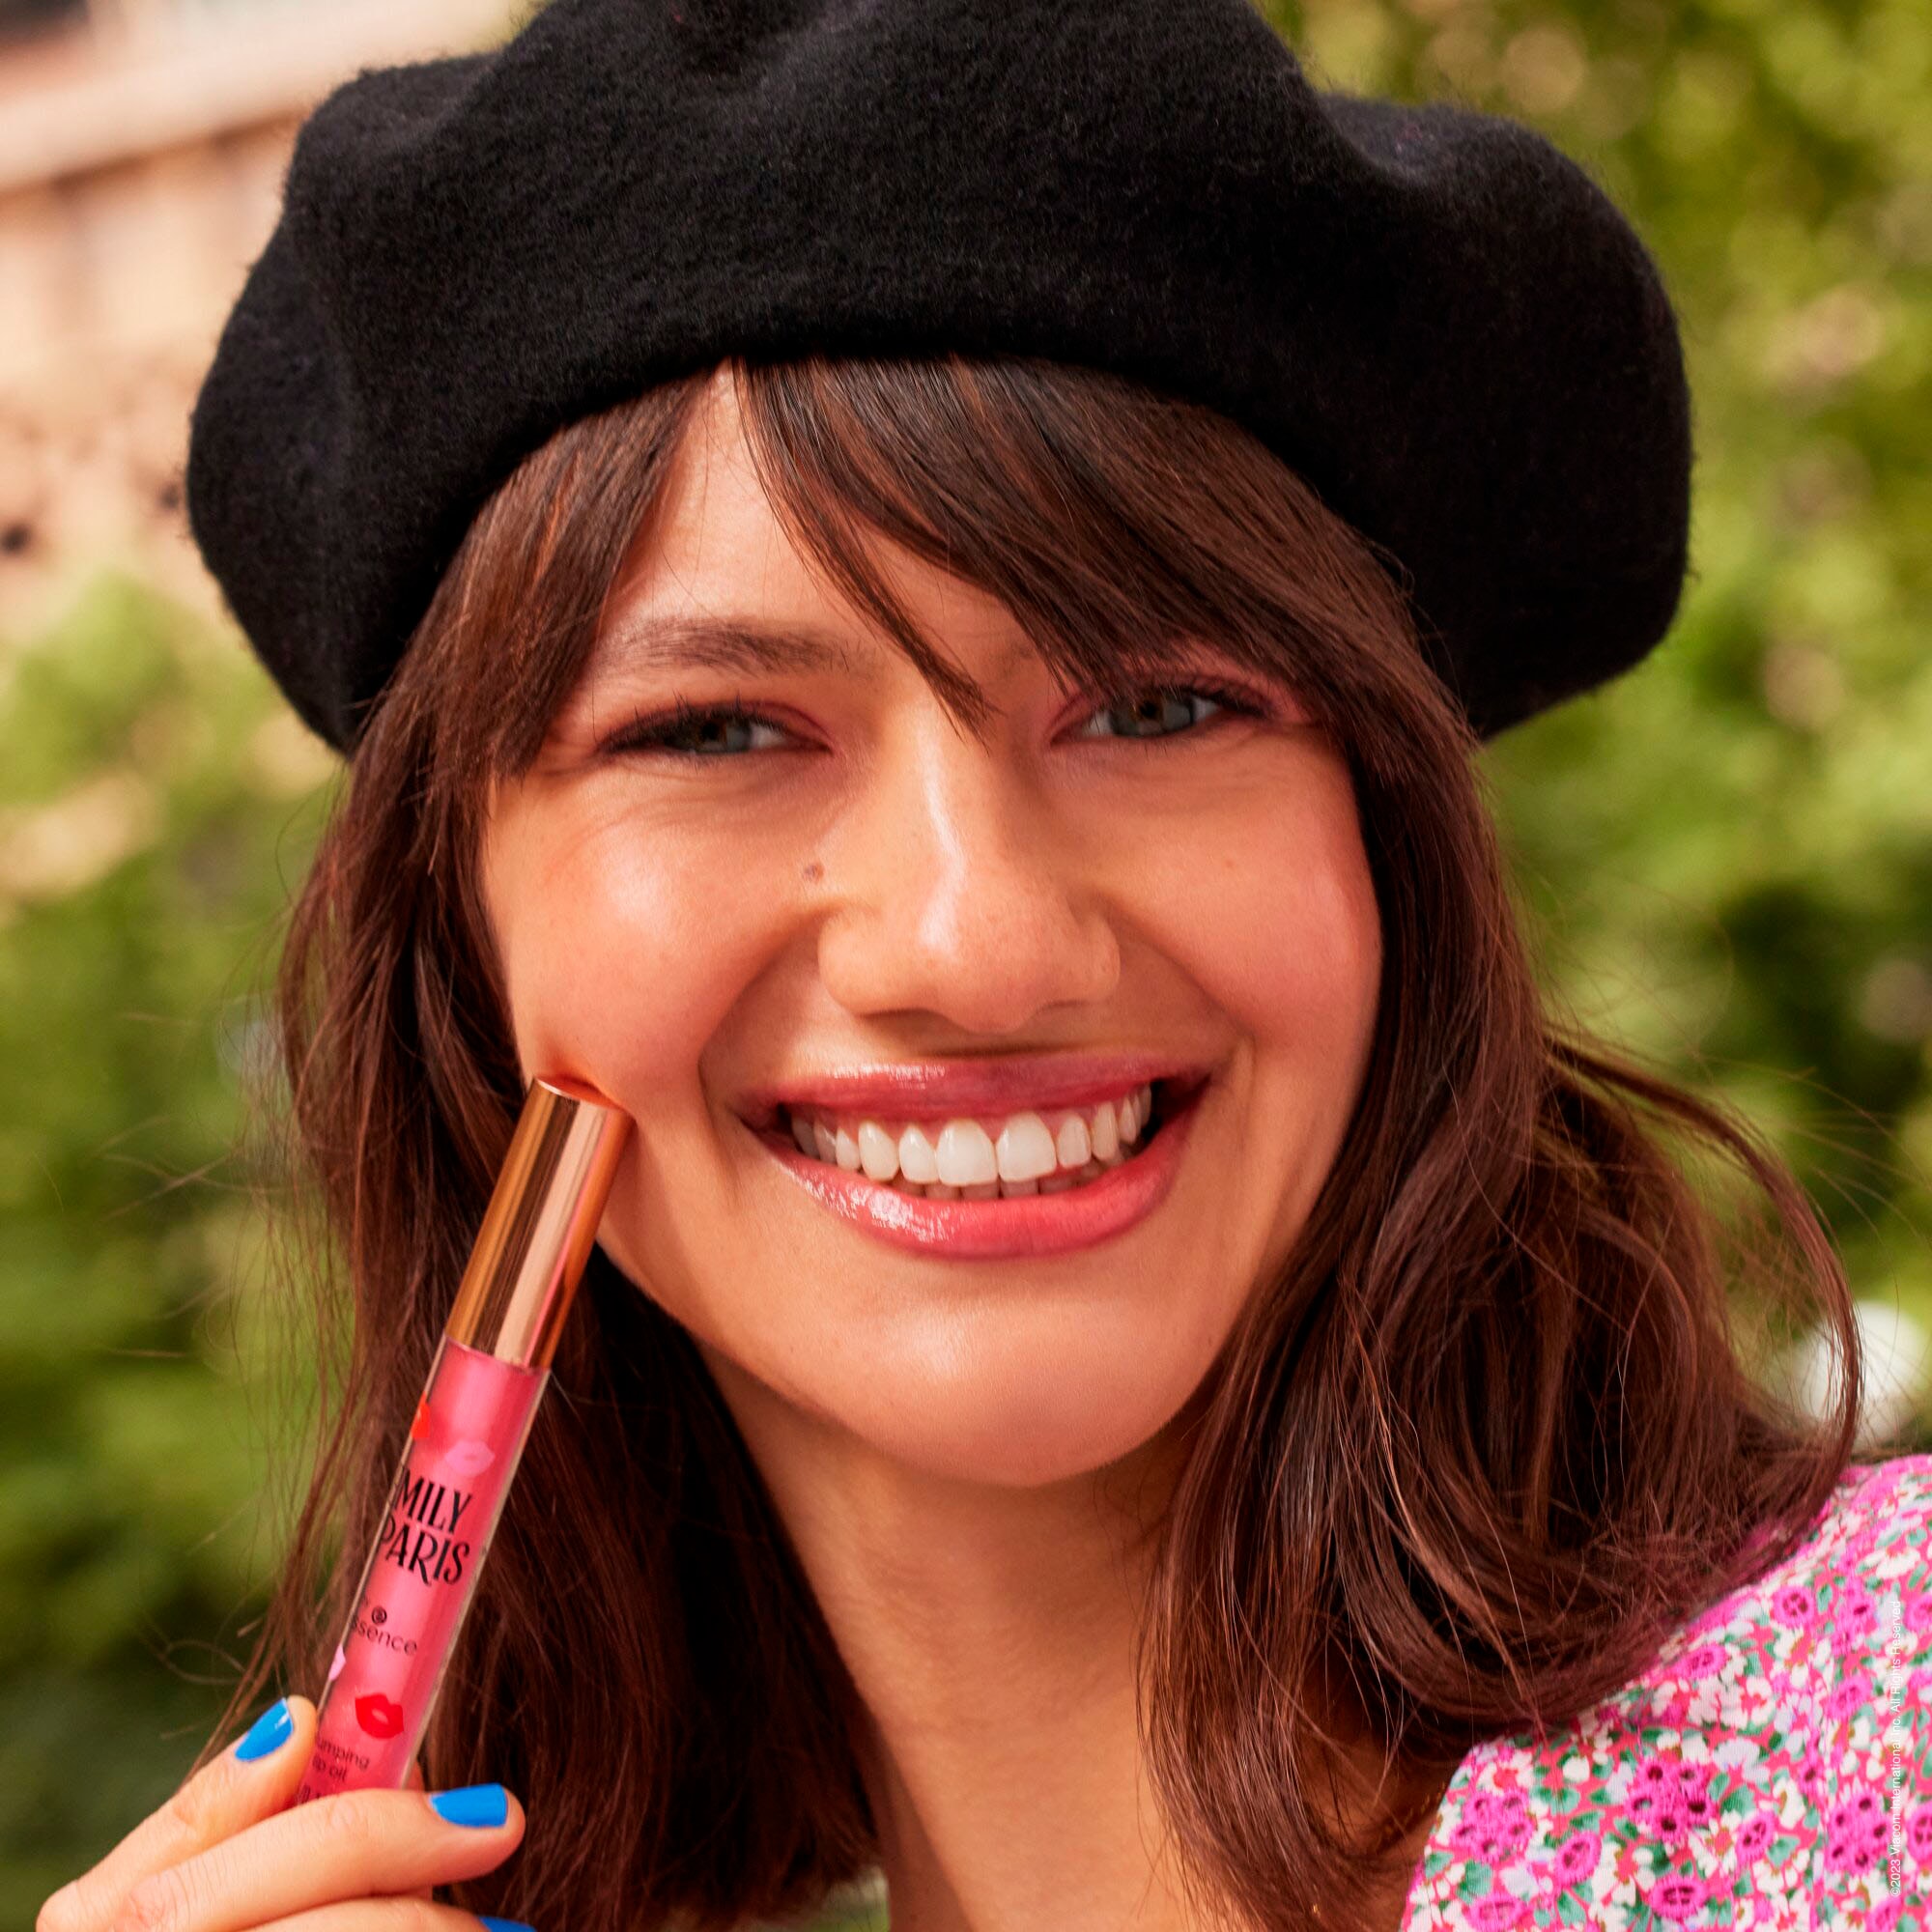 Essence Lipgloss »EMILY IN PARIS by essence plumping lip oil« online bei  UNIVERSAL